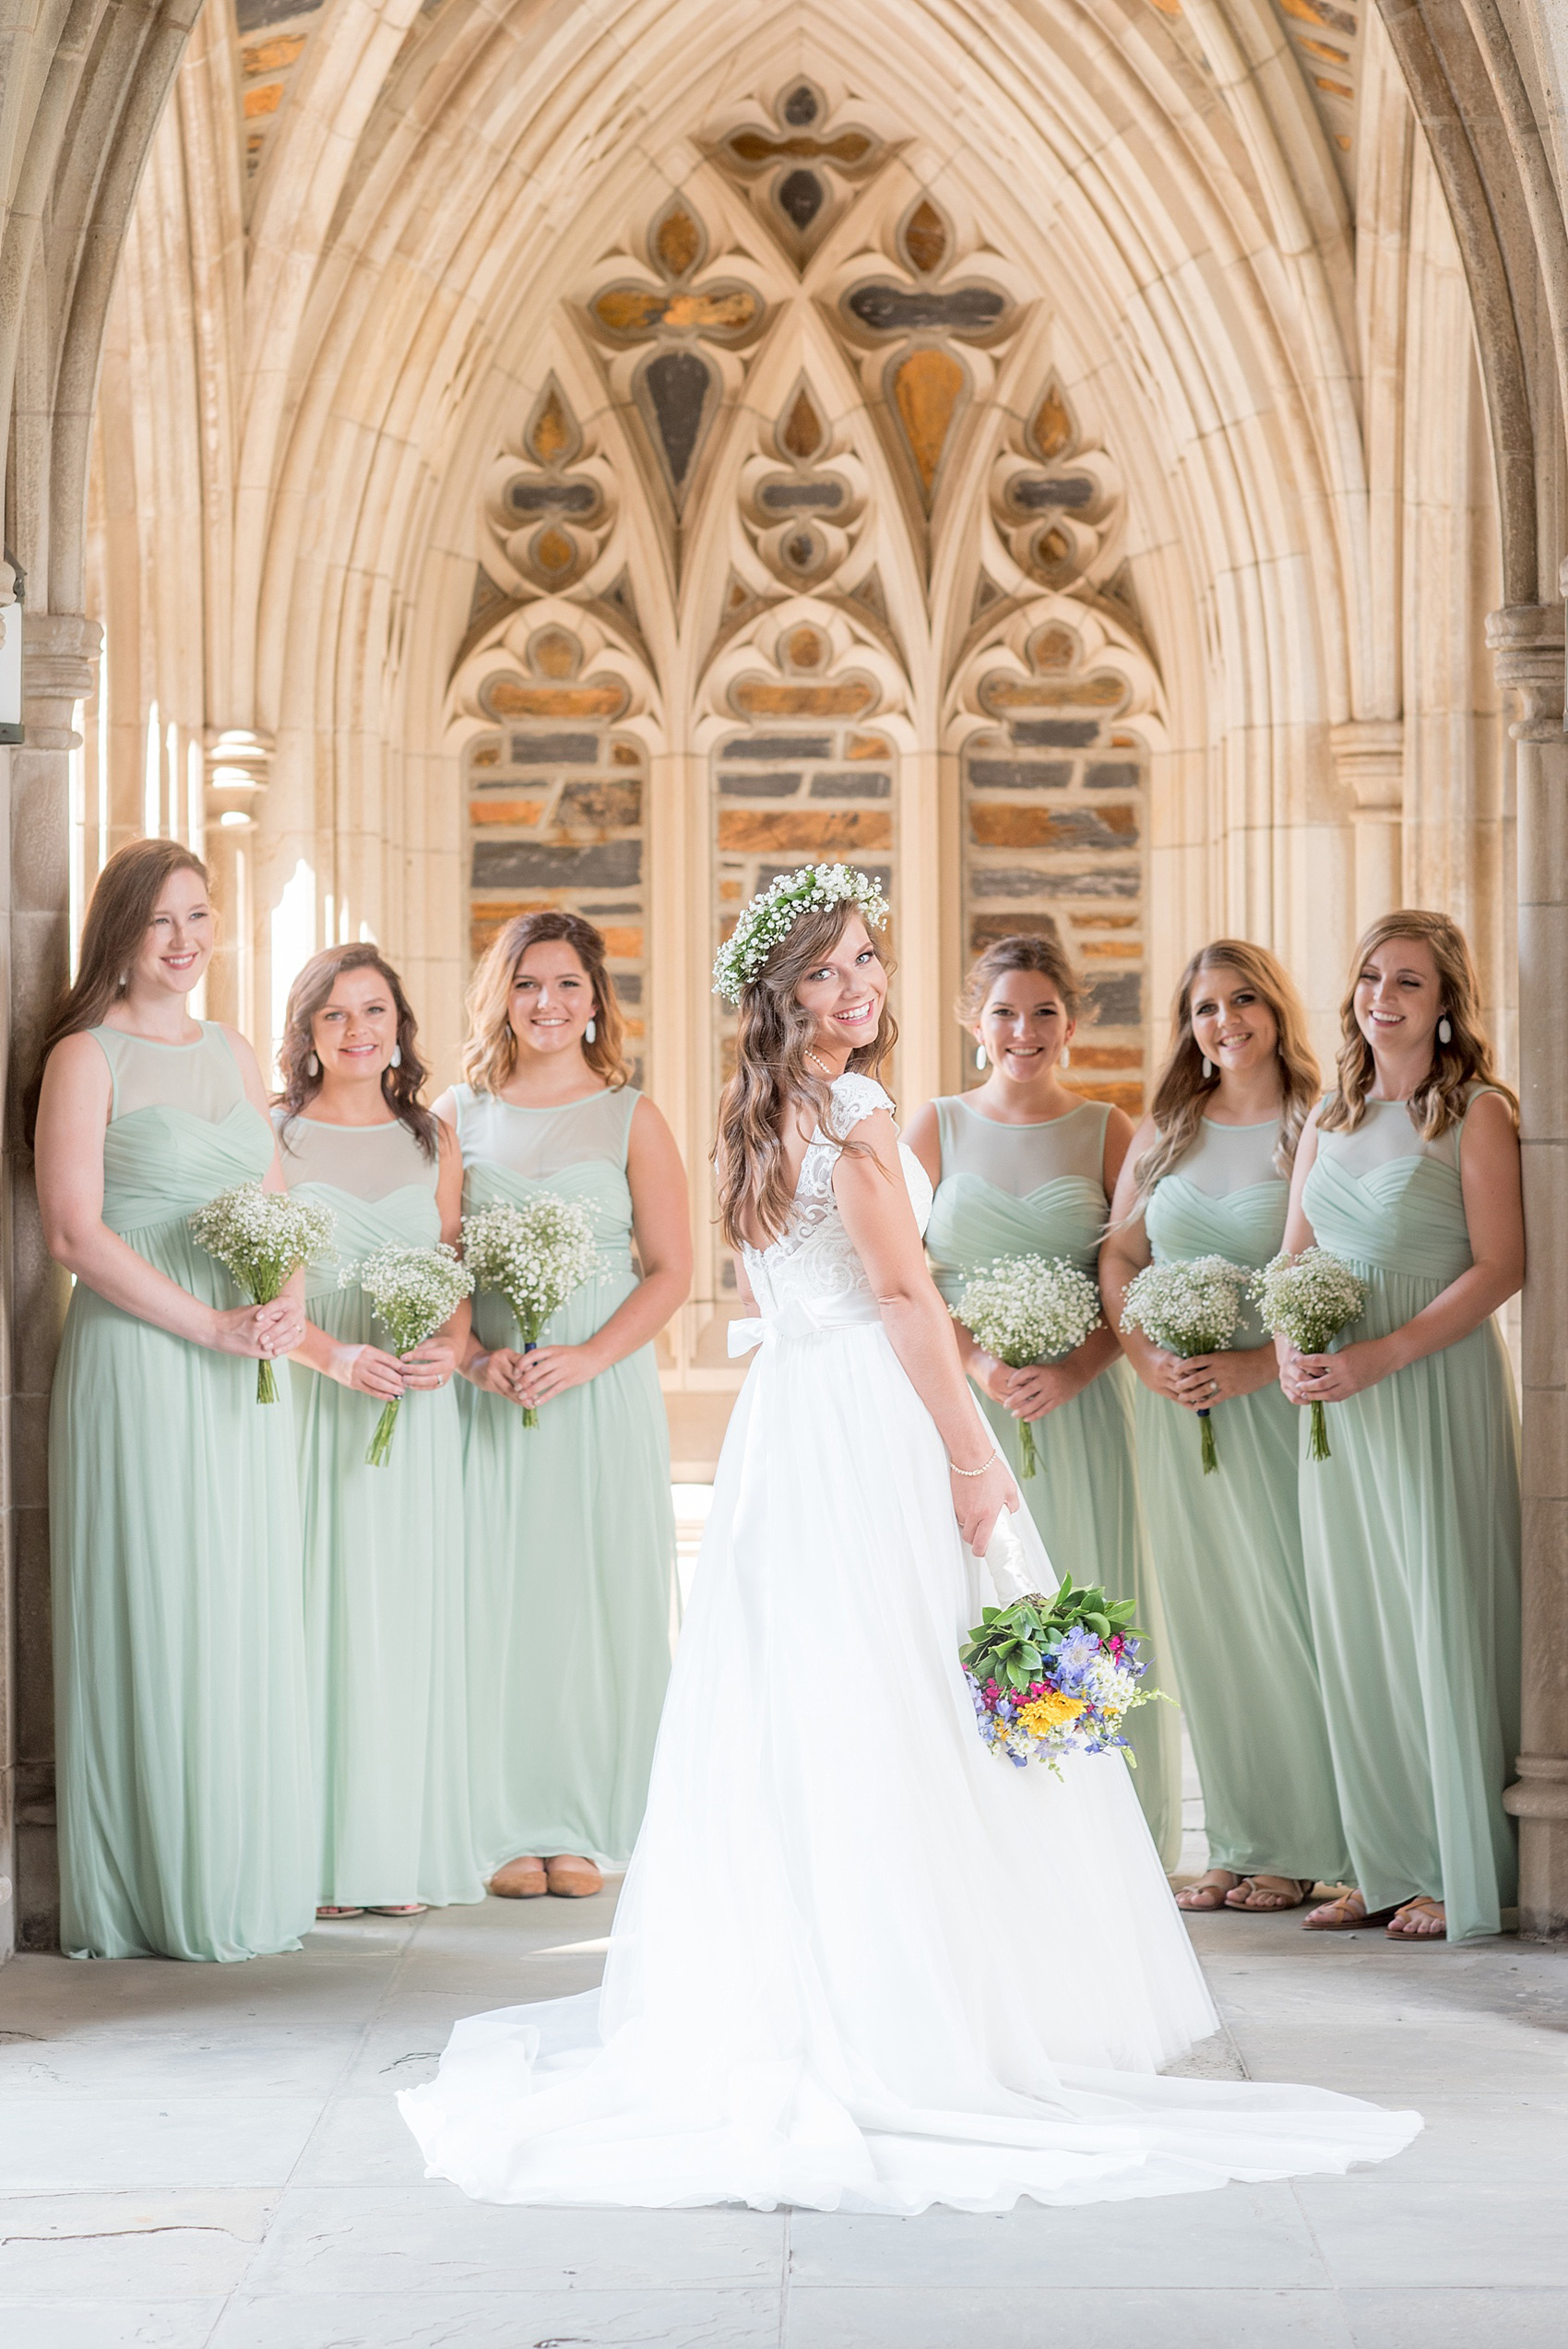 Mikkel Paige Photography photo of a Duke Chapel wedding in Durham, North Carolina. The bride in a lace cap sleeve gown and her bridesmaids mint green gowns under the gothic arches of the iconic church.